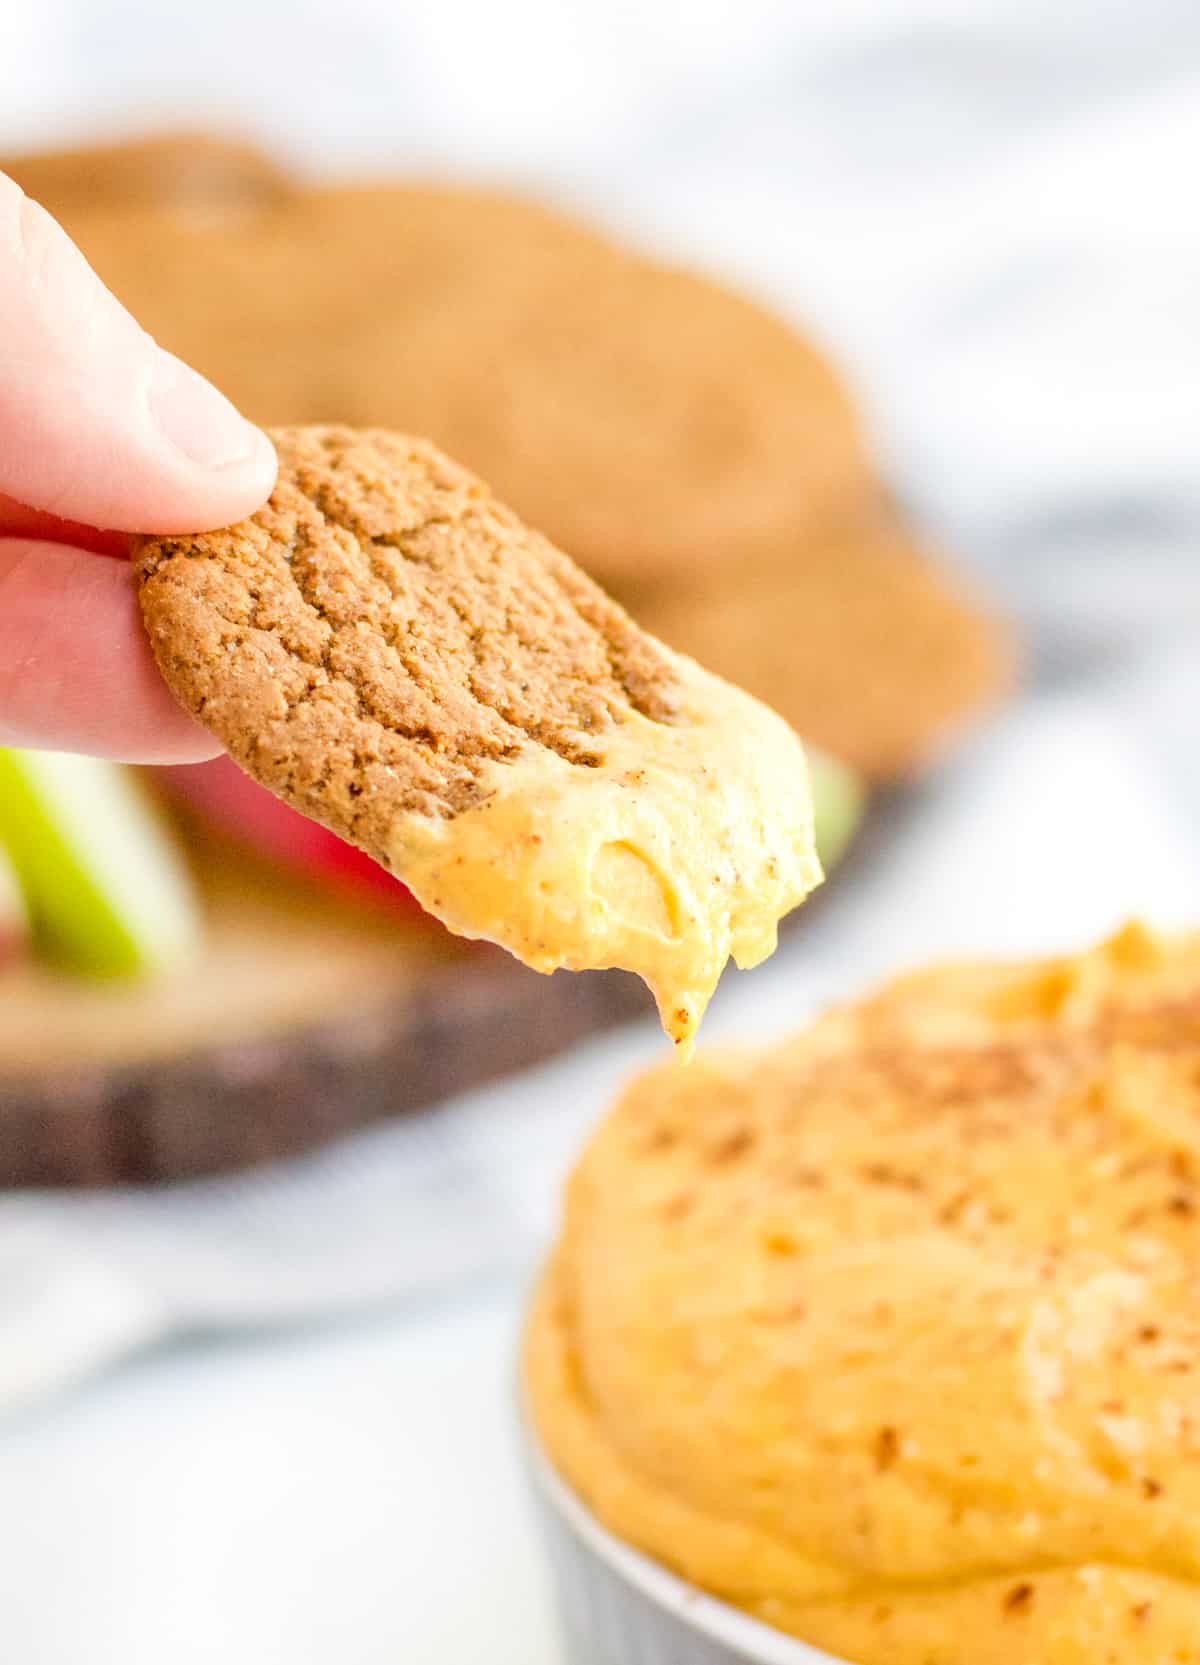 Hand holding a cookie with dip on it with dip in bowl and background along with other dippers.